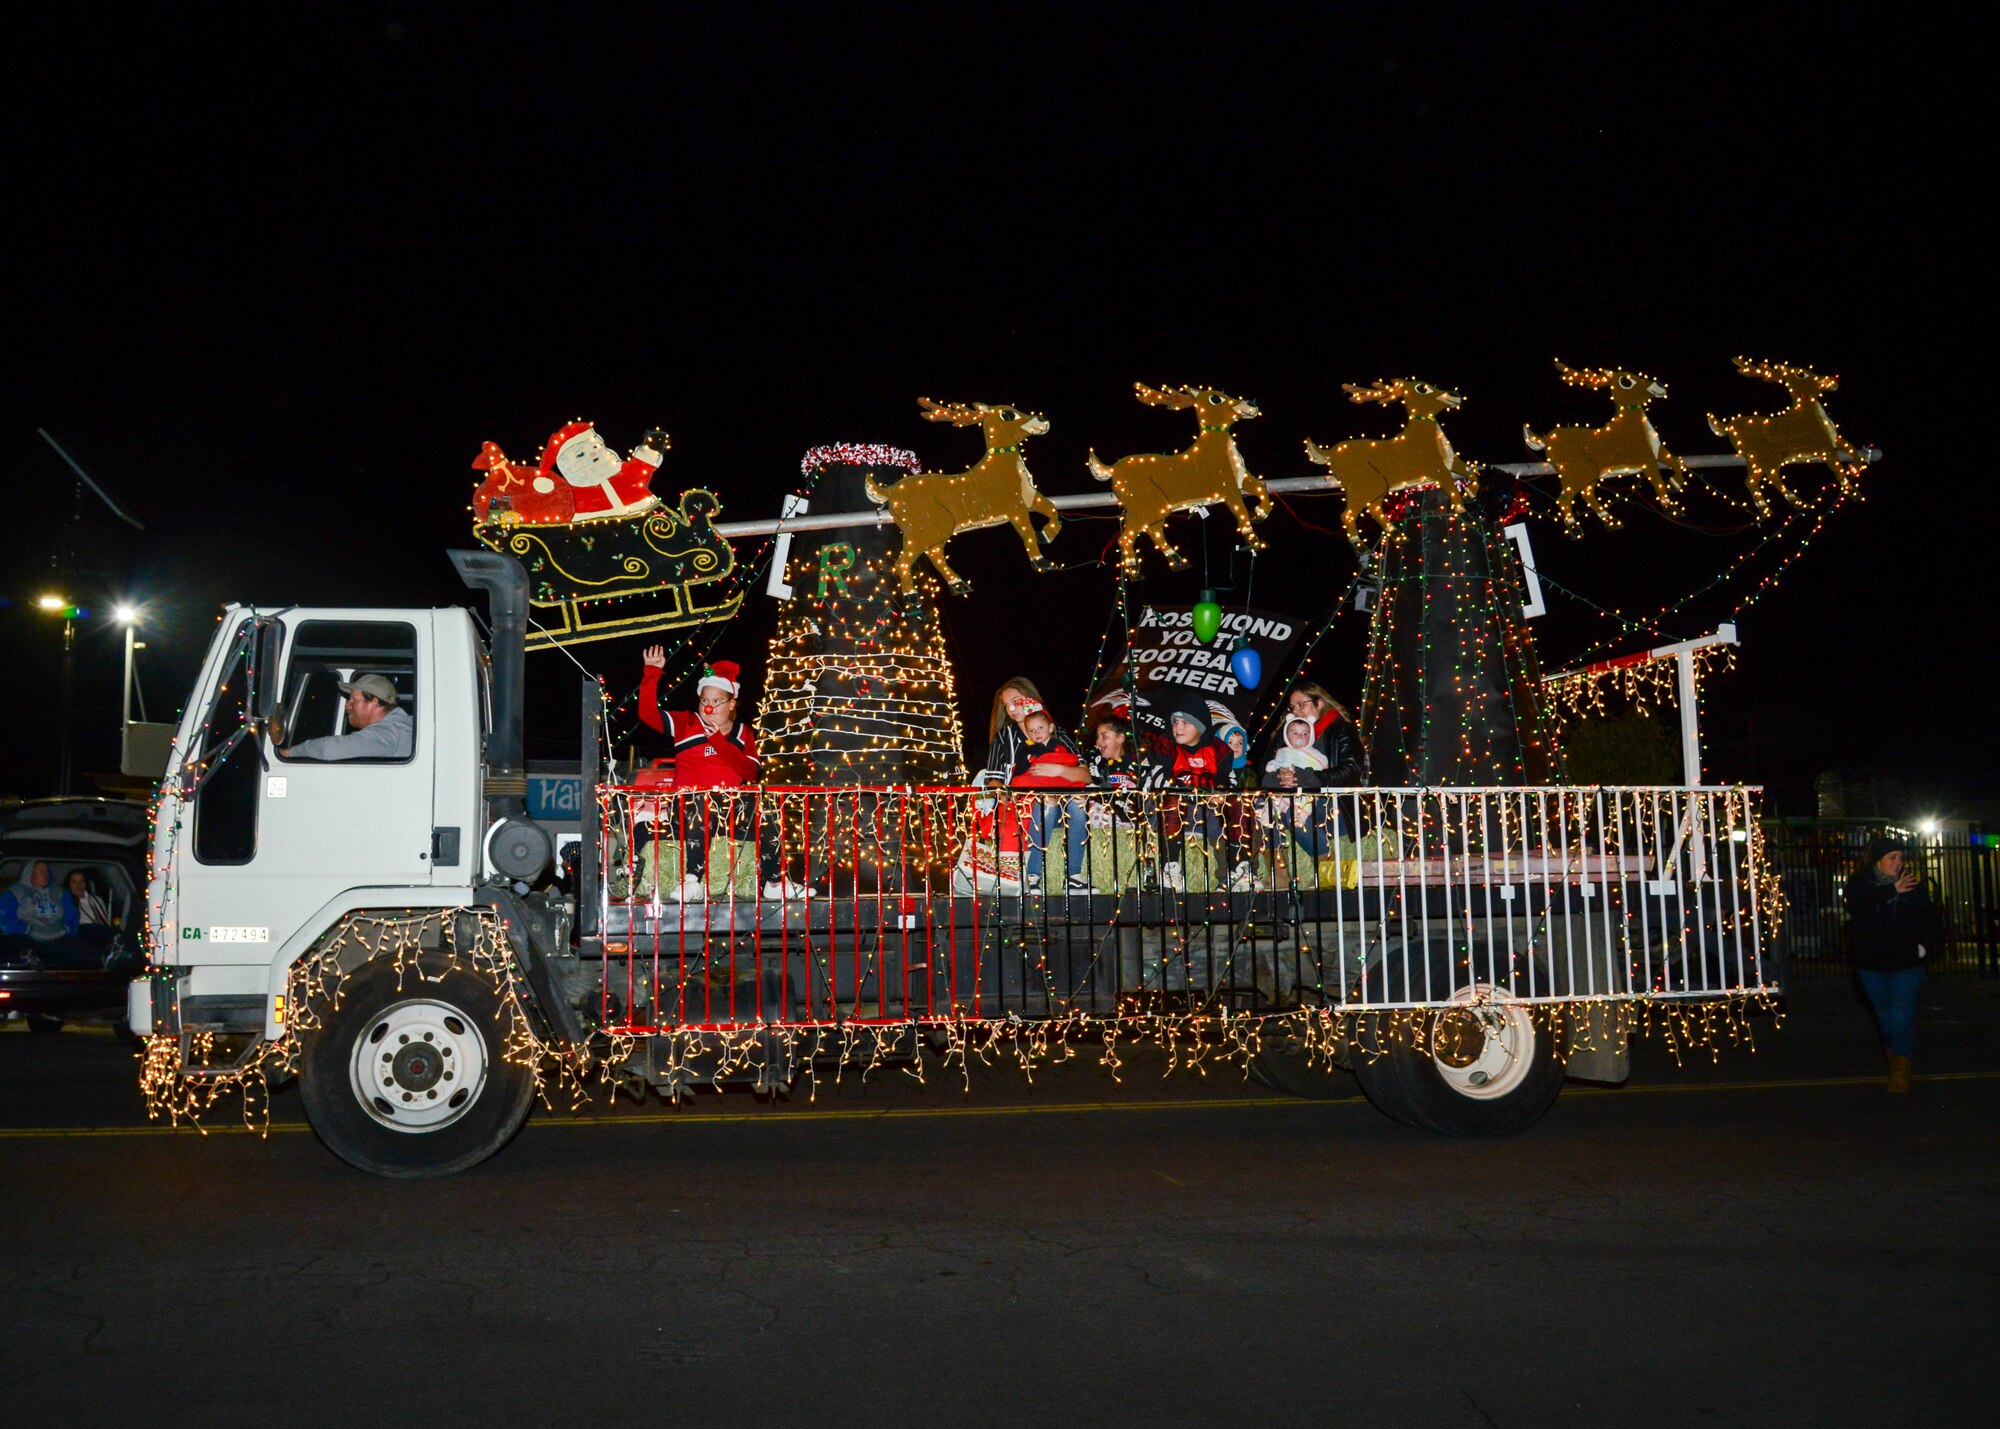 An entry in to the Parade of Lights is adorned with Christmas decorations and lights in Rosamond, California, Dec. 1. (U.S. Air Force photo by Giancarlo Casem)